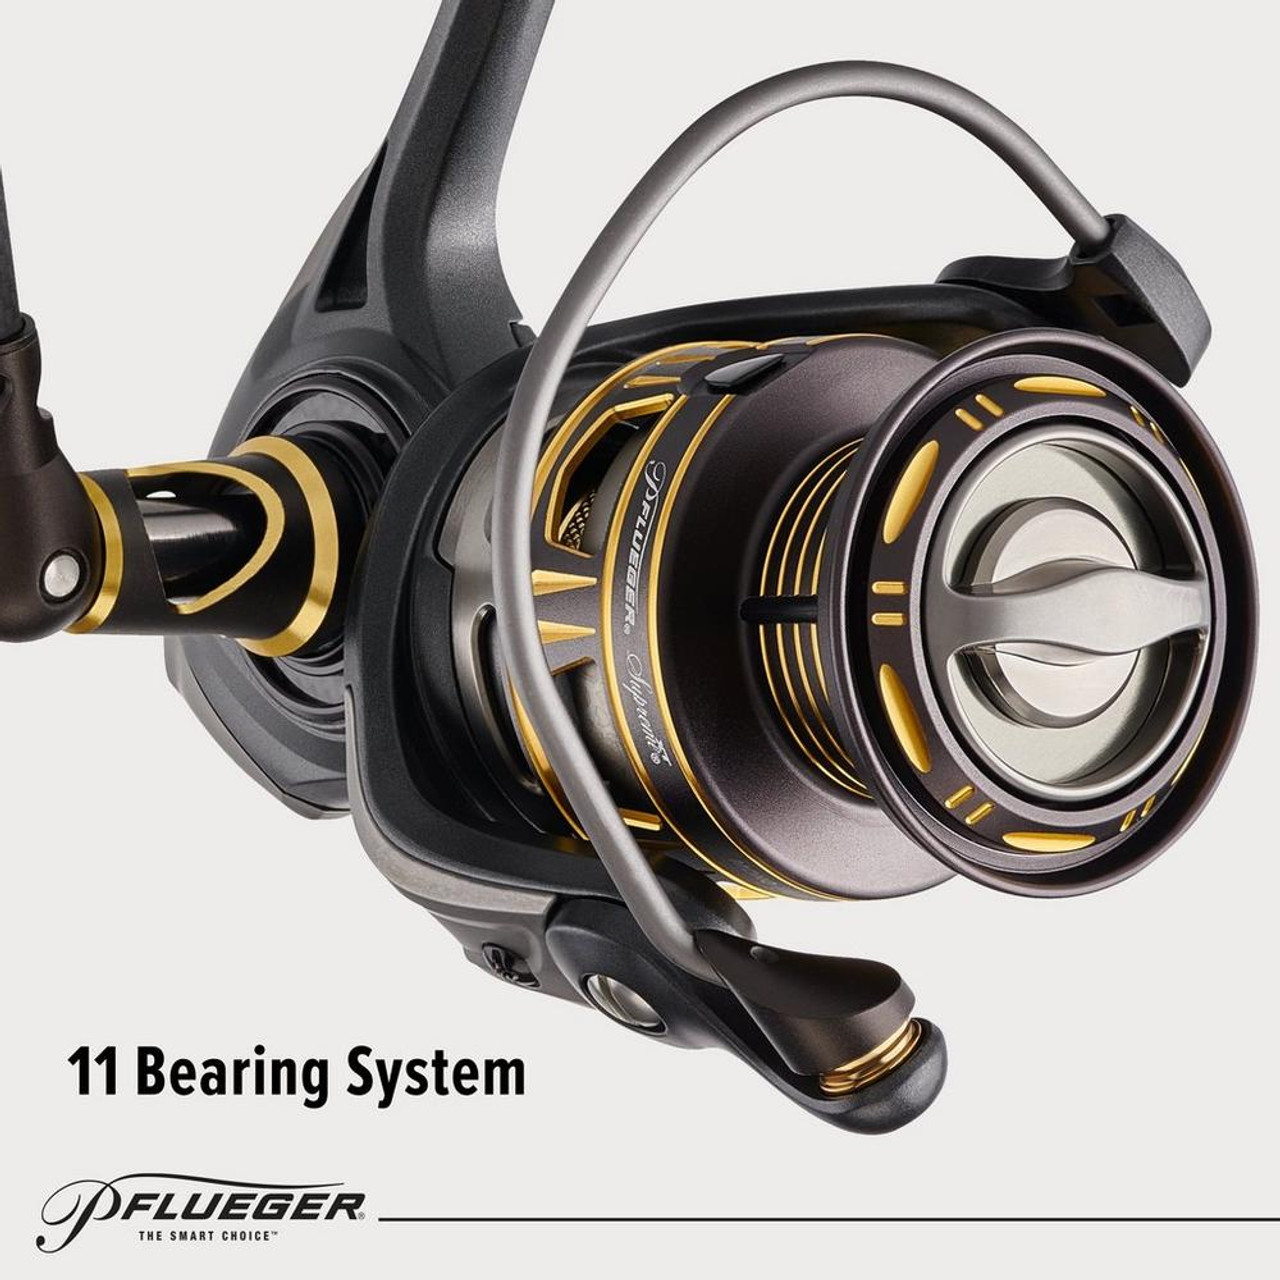 Discount Pflueger Supreme XT 30 - Spinning Reel (6.2:1) for Sale